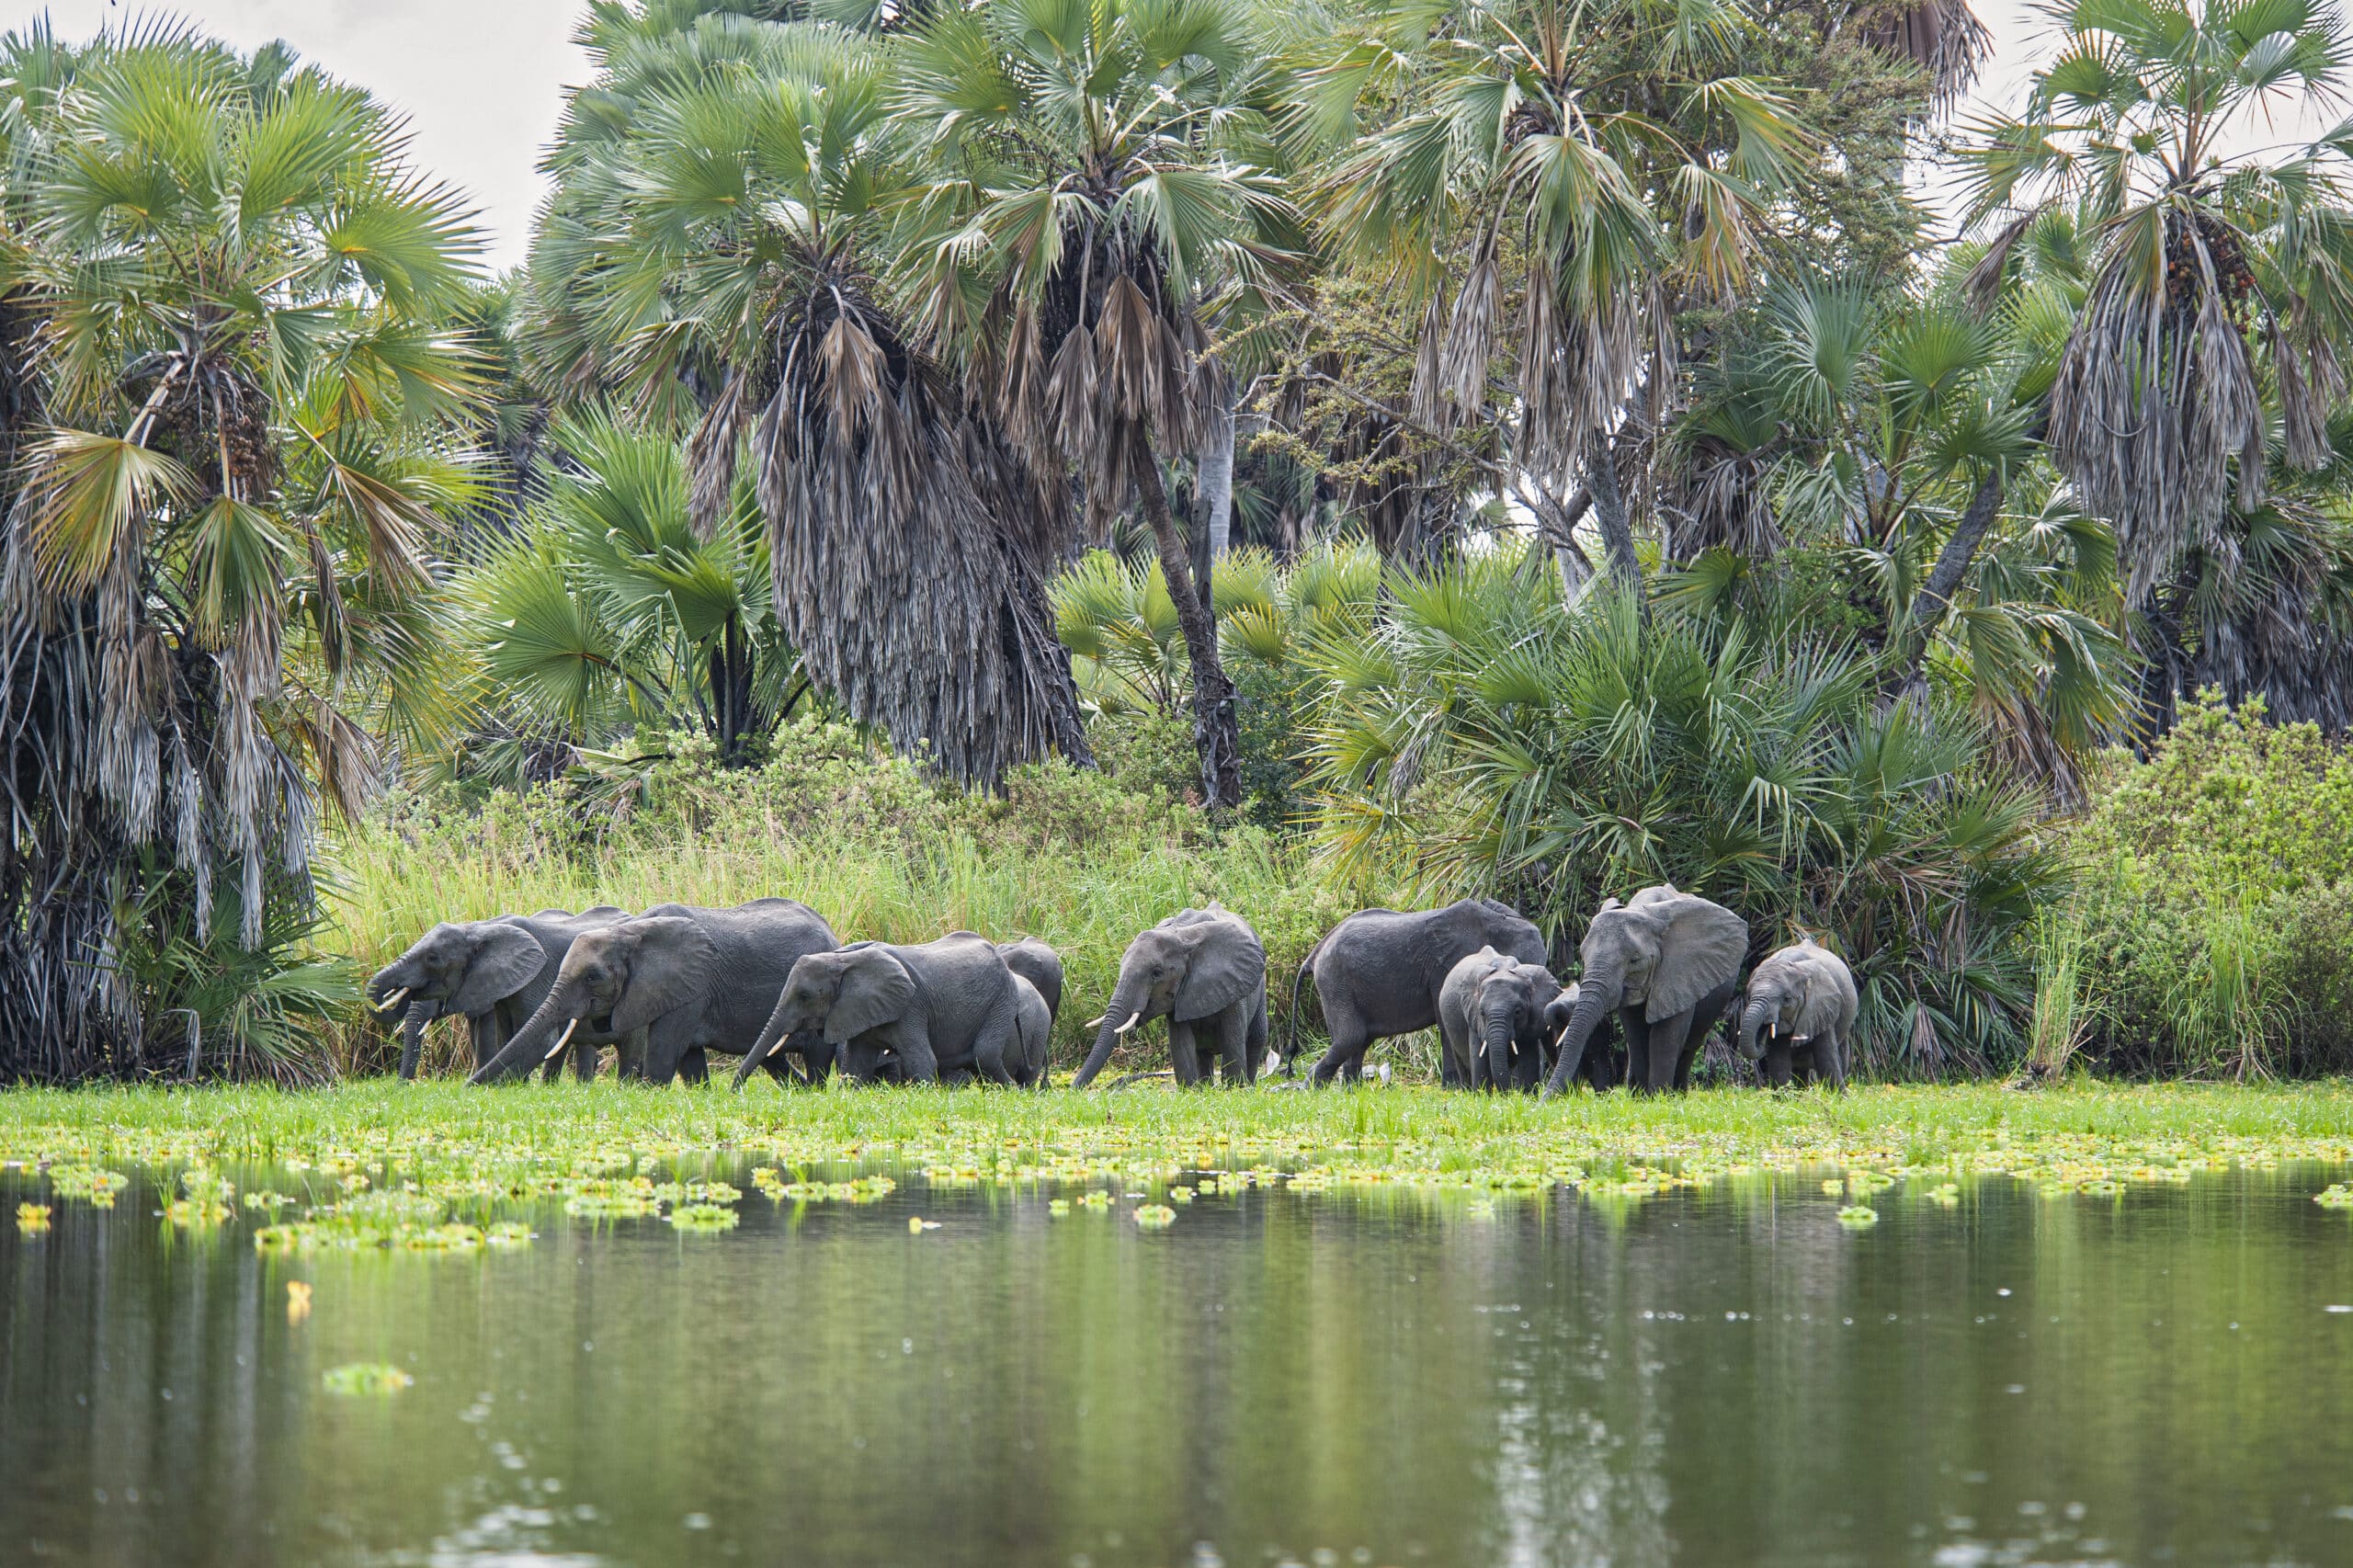 Elephants by the river in Nyerere National Park